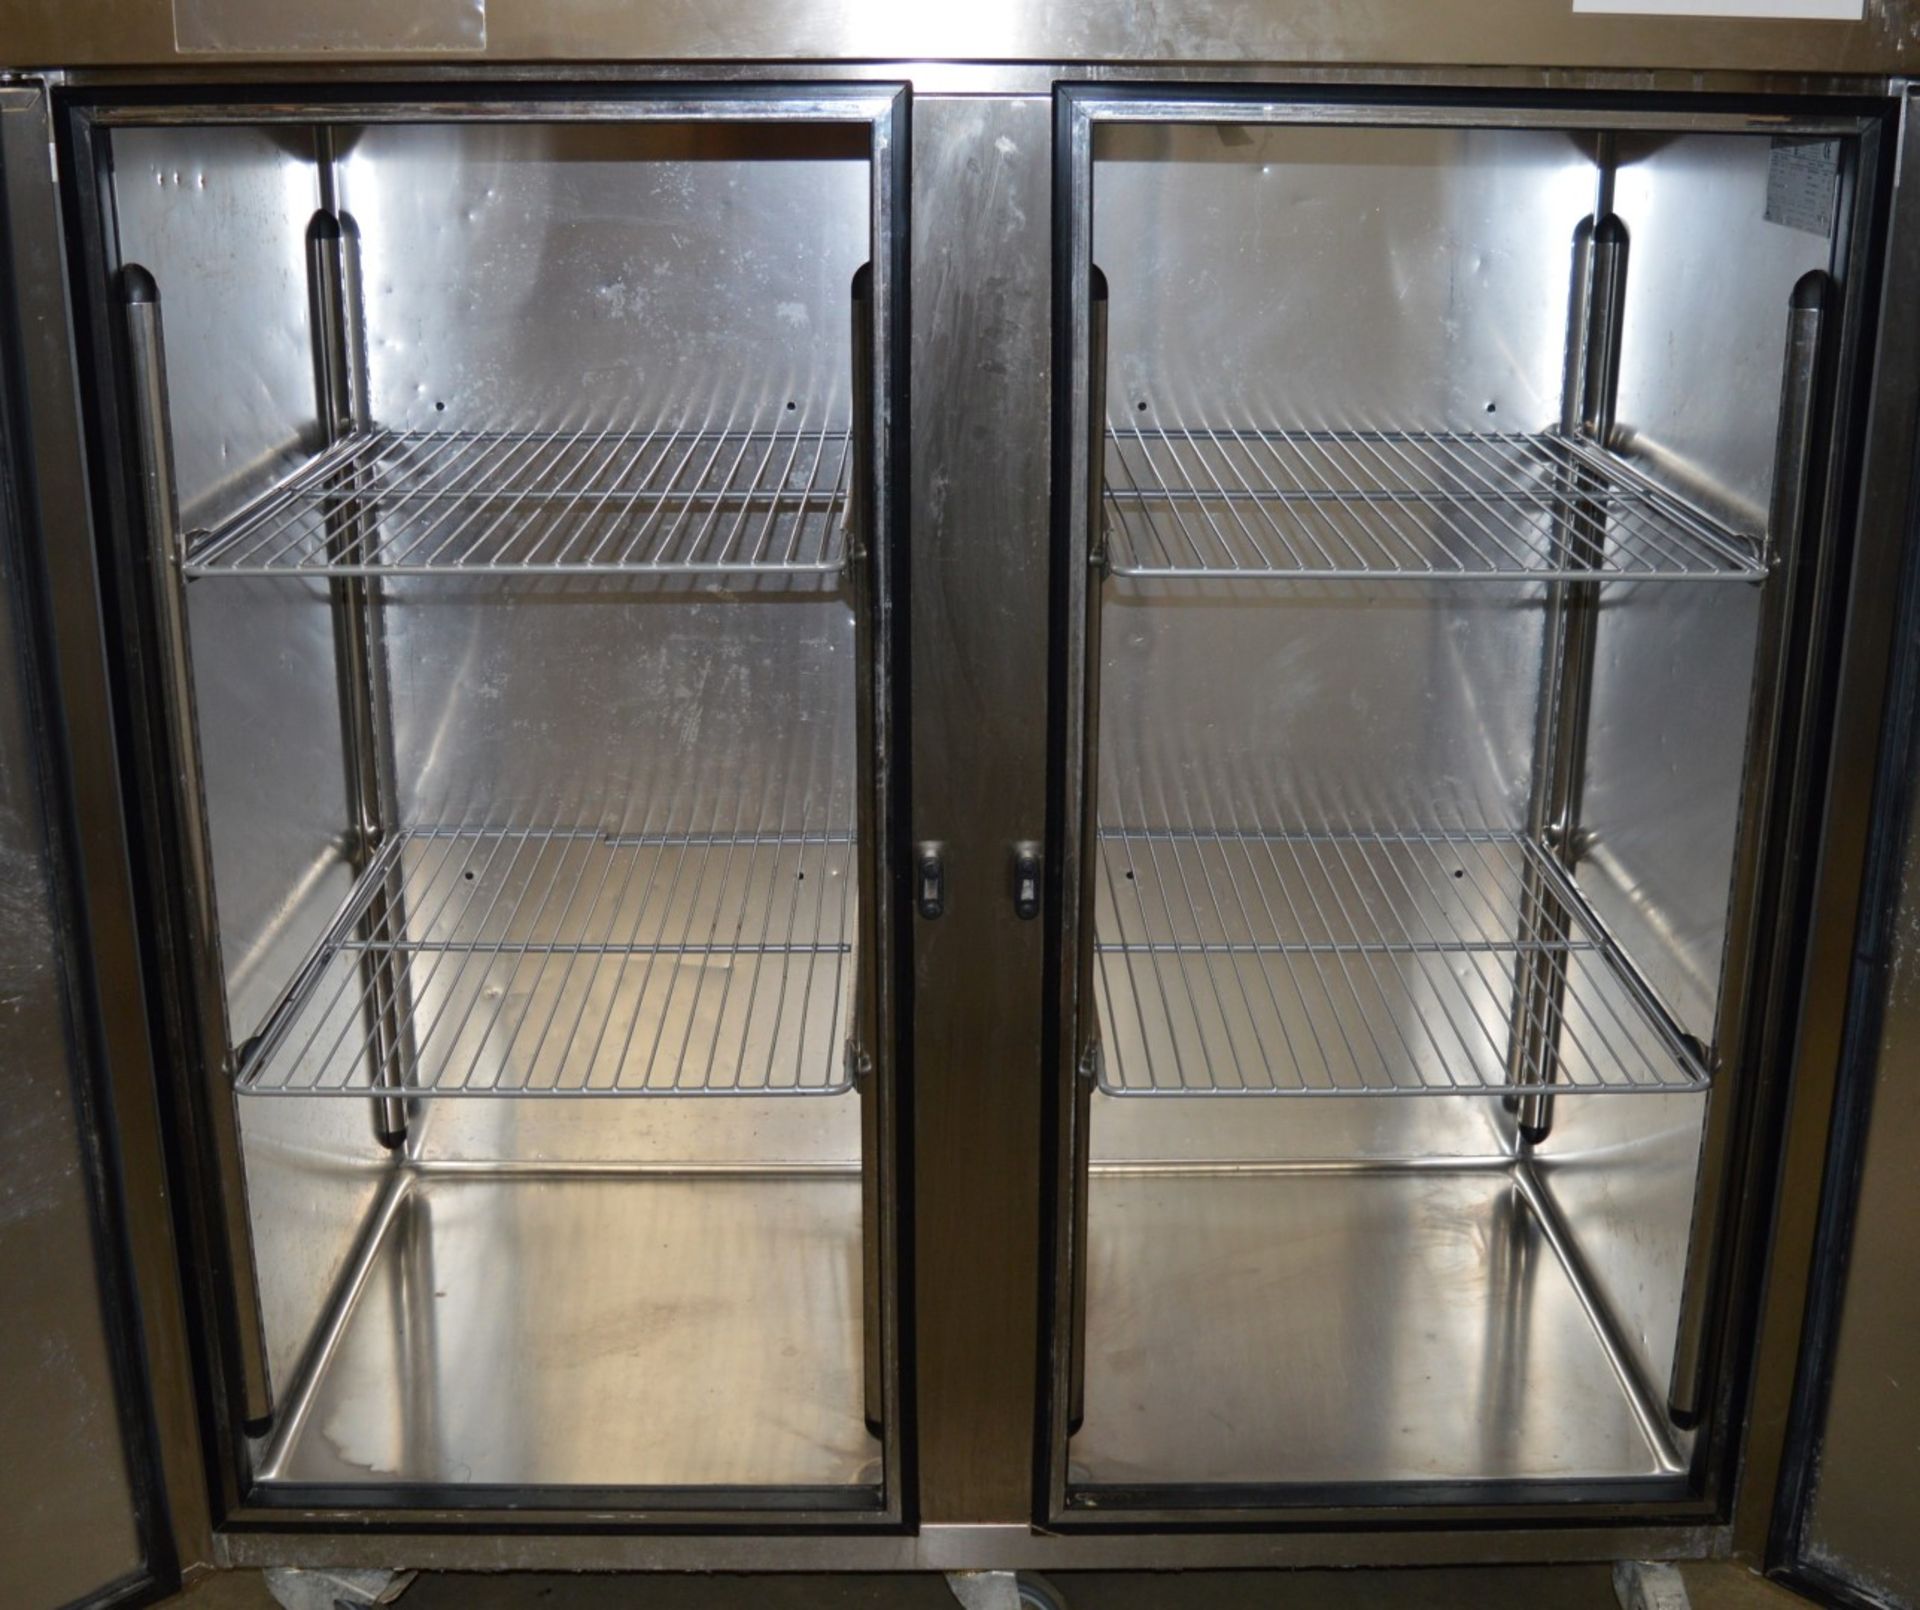 1 x Foster ProG1100L-A Gastro Pro 1100 Litre Stainless Steal Commercial Freezer - Aluminium Interior - Image 5 of 8